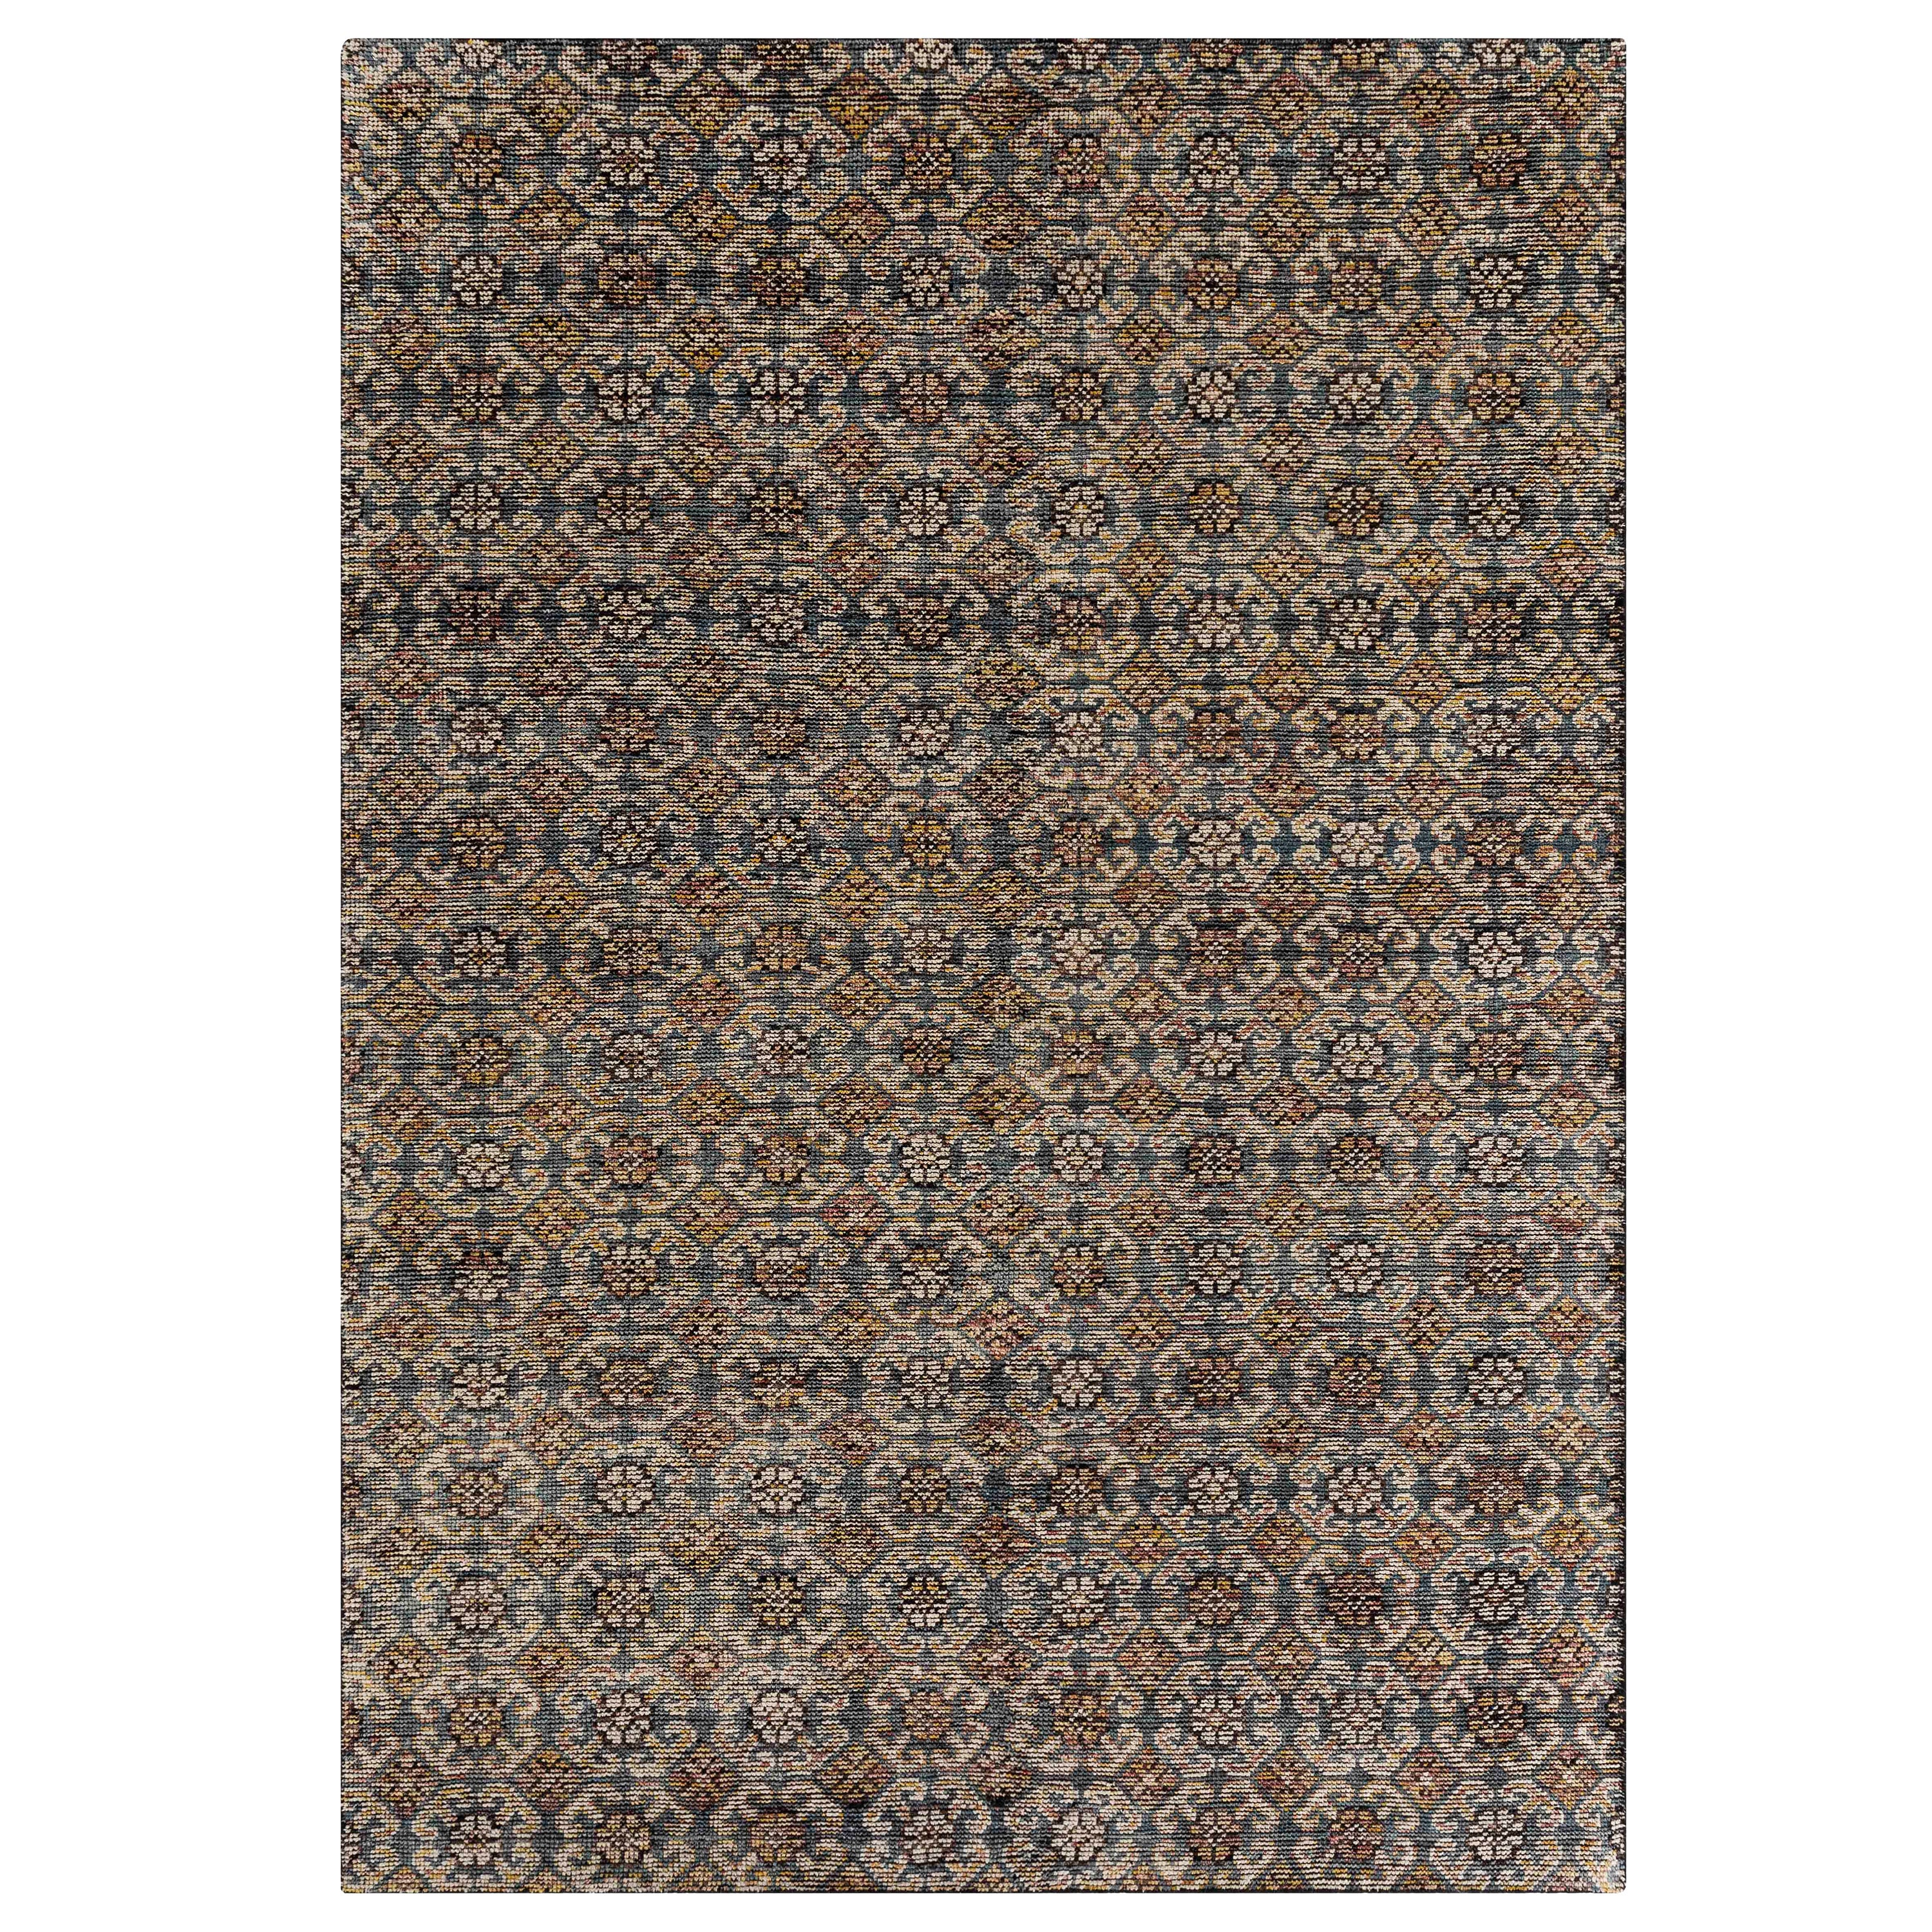 Hand Knotted Hidraulic Medium Rug in Multi Color by GAN